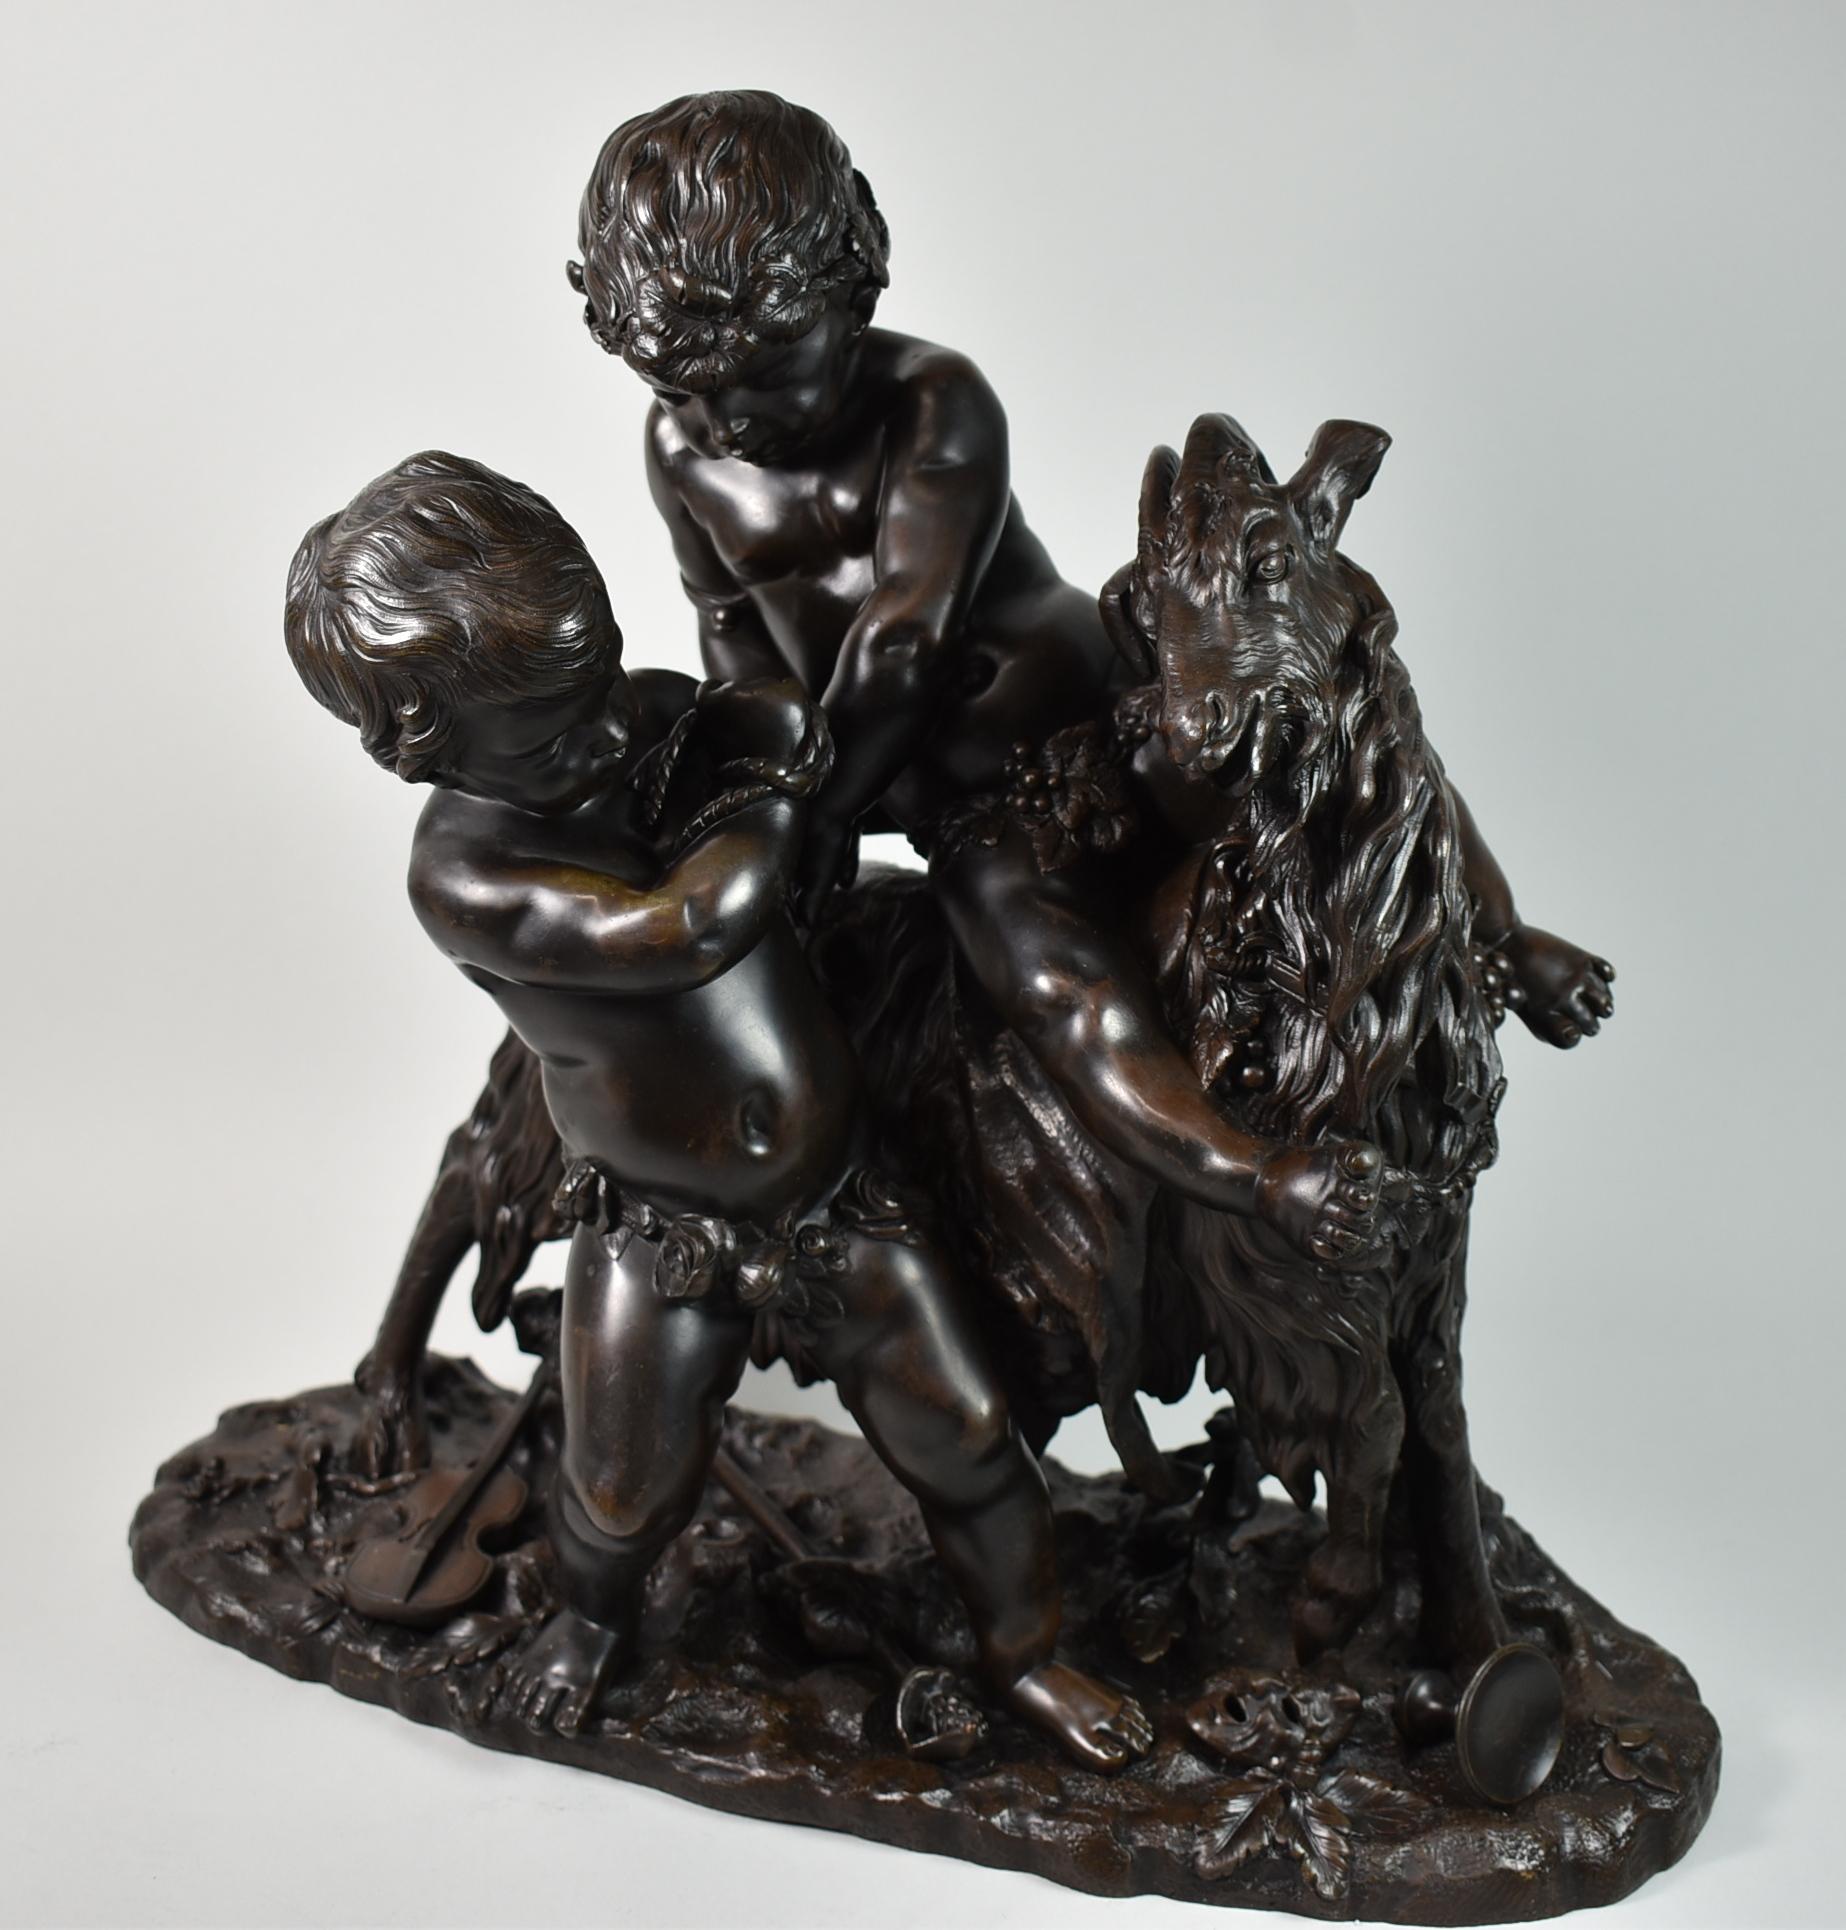 Large French Rococo style bronze figural group of cherubs and a goat by Henri Picard (1840-90). Small stamp on bottom of base 0000 HPICARD. Base is modeled after a similar sculpture by Claude Michael Clodion (1738-1814). Many Picard statues were